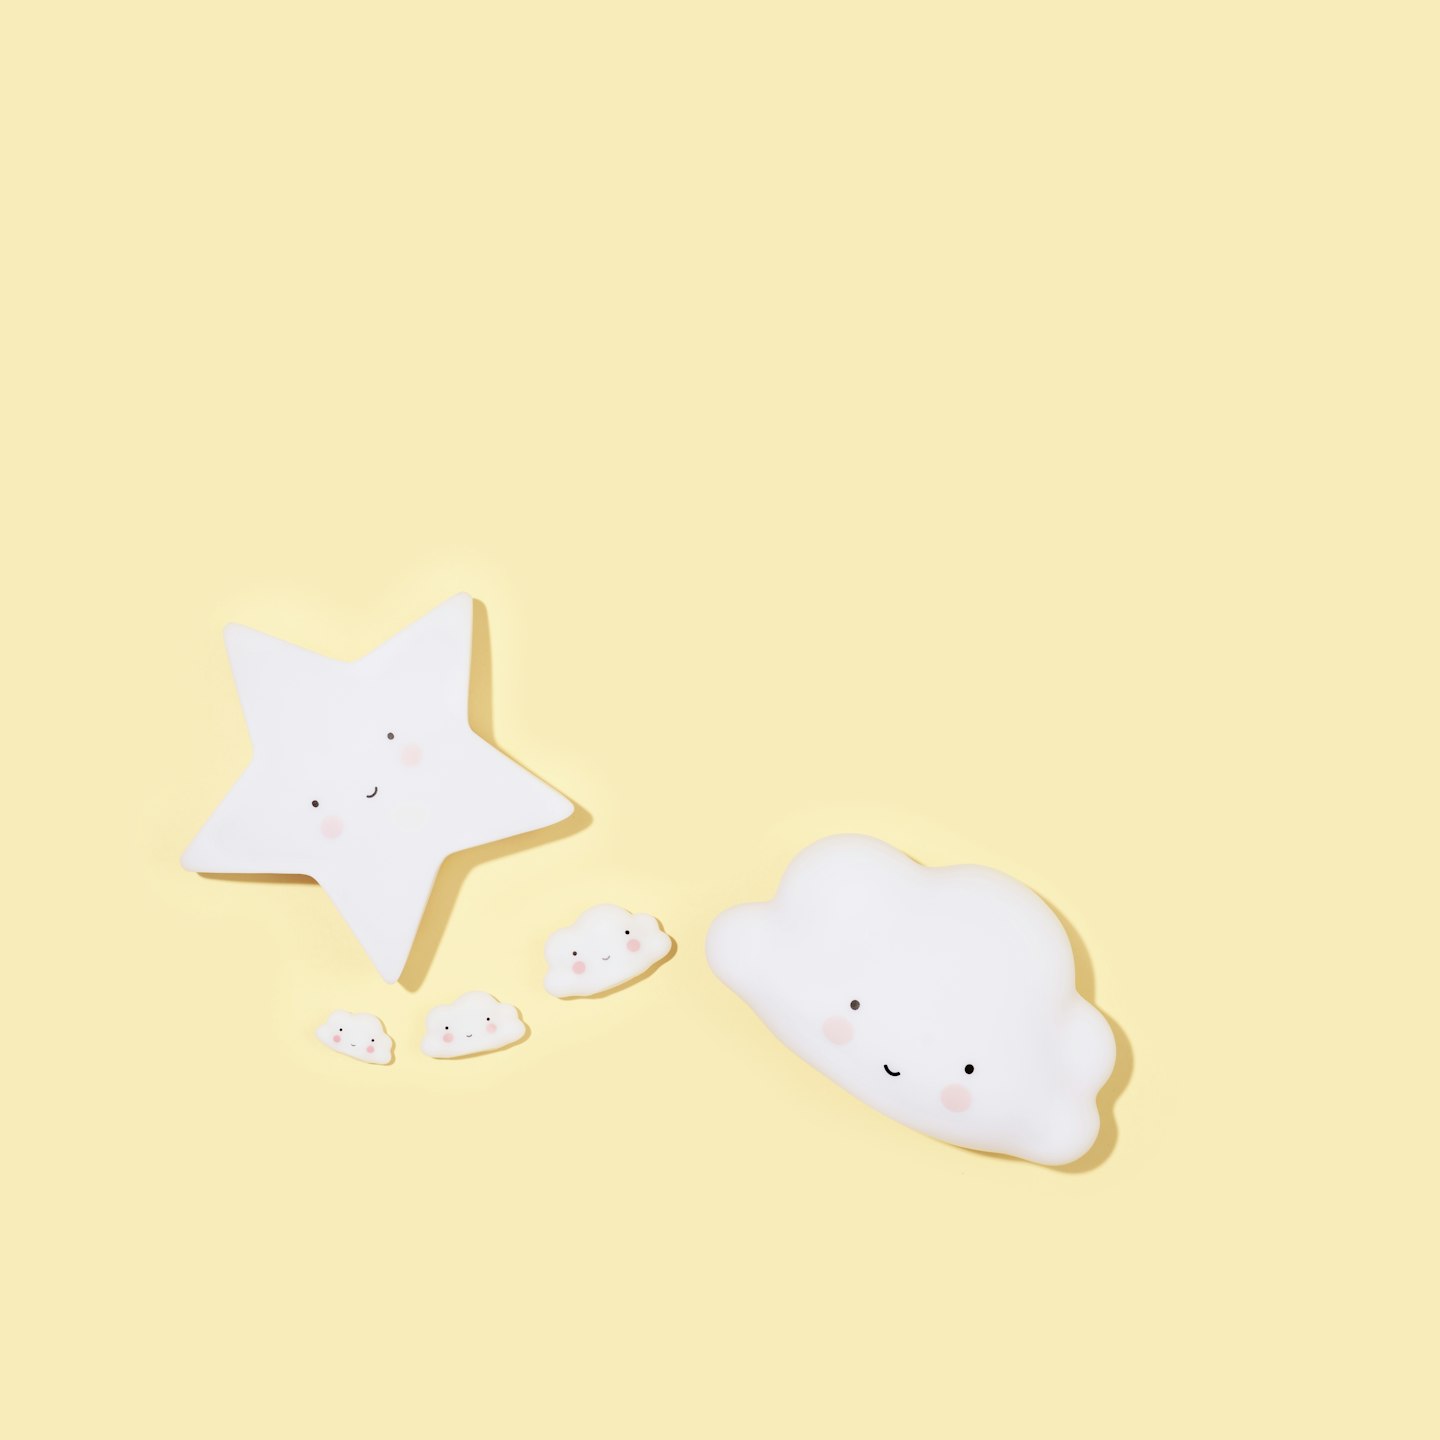 White Cloud and Star Little Lights, and Cloud Minis from A Lovely Little Company, £12.95 each and £3.95 per pack of 3